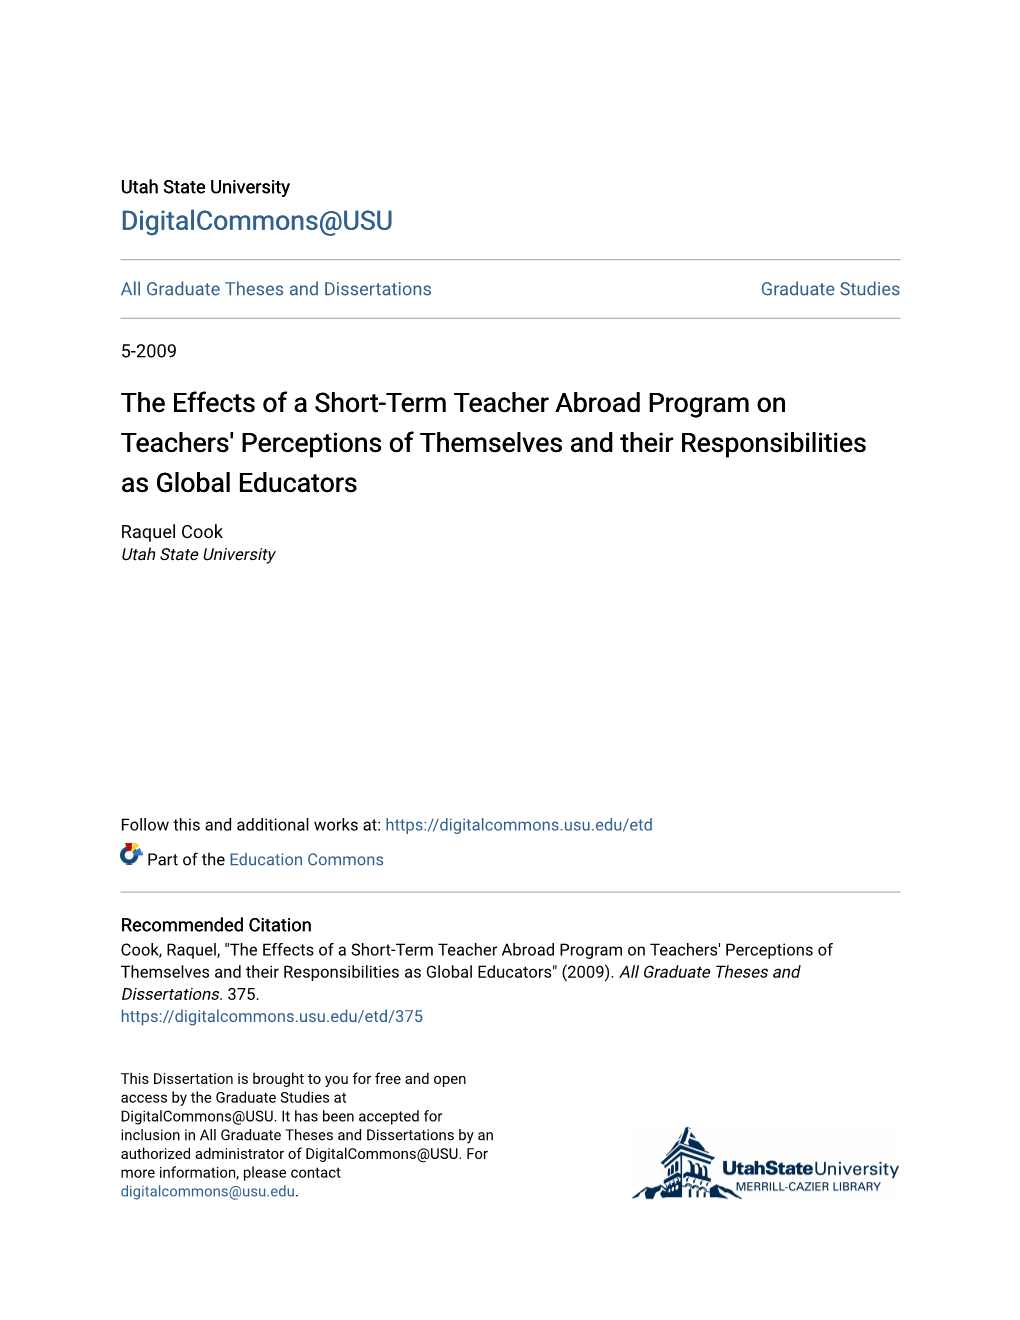 The Effects of a Short-Term Teacher Abroad Program on Teachers' Perceptions of Themselves and Their Responsibilities As Global Educators